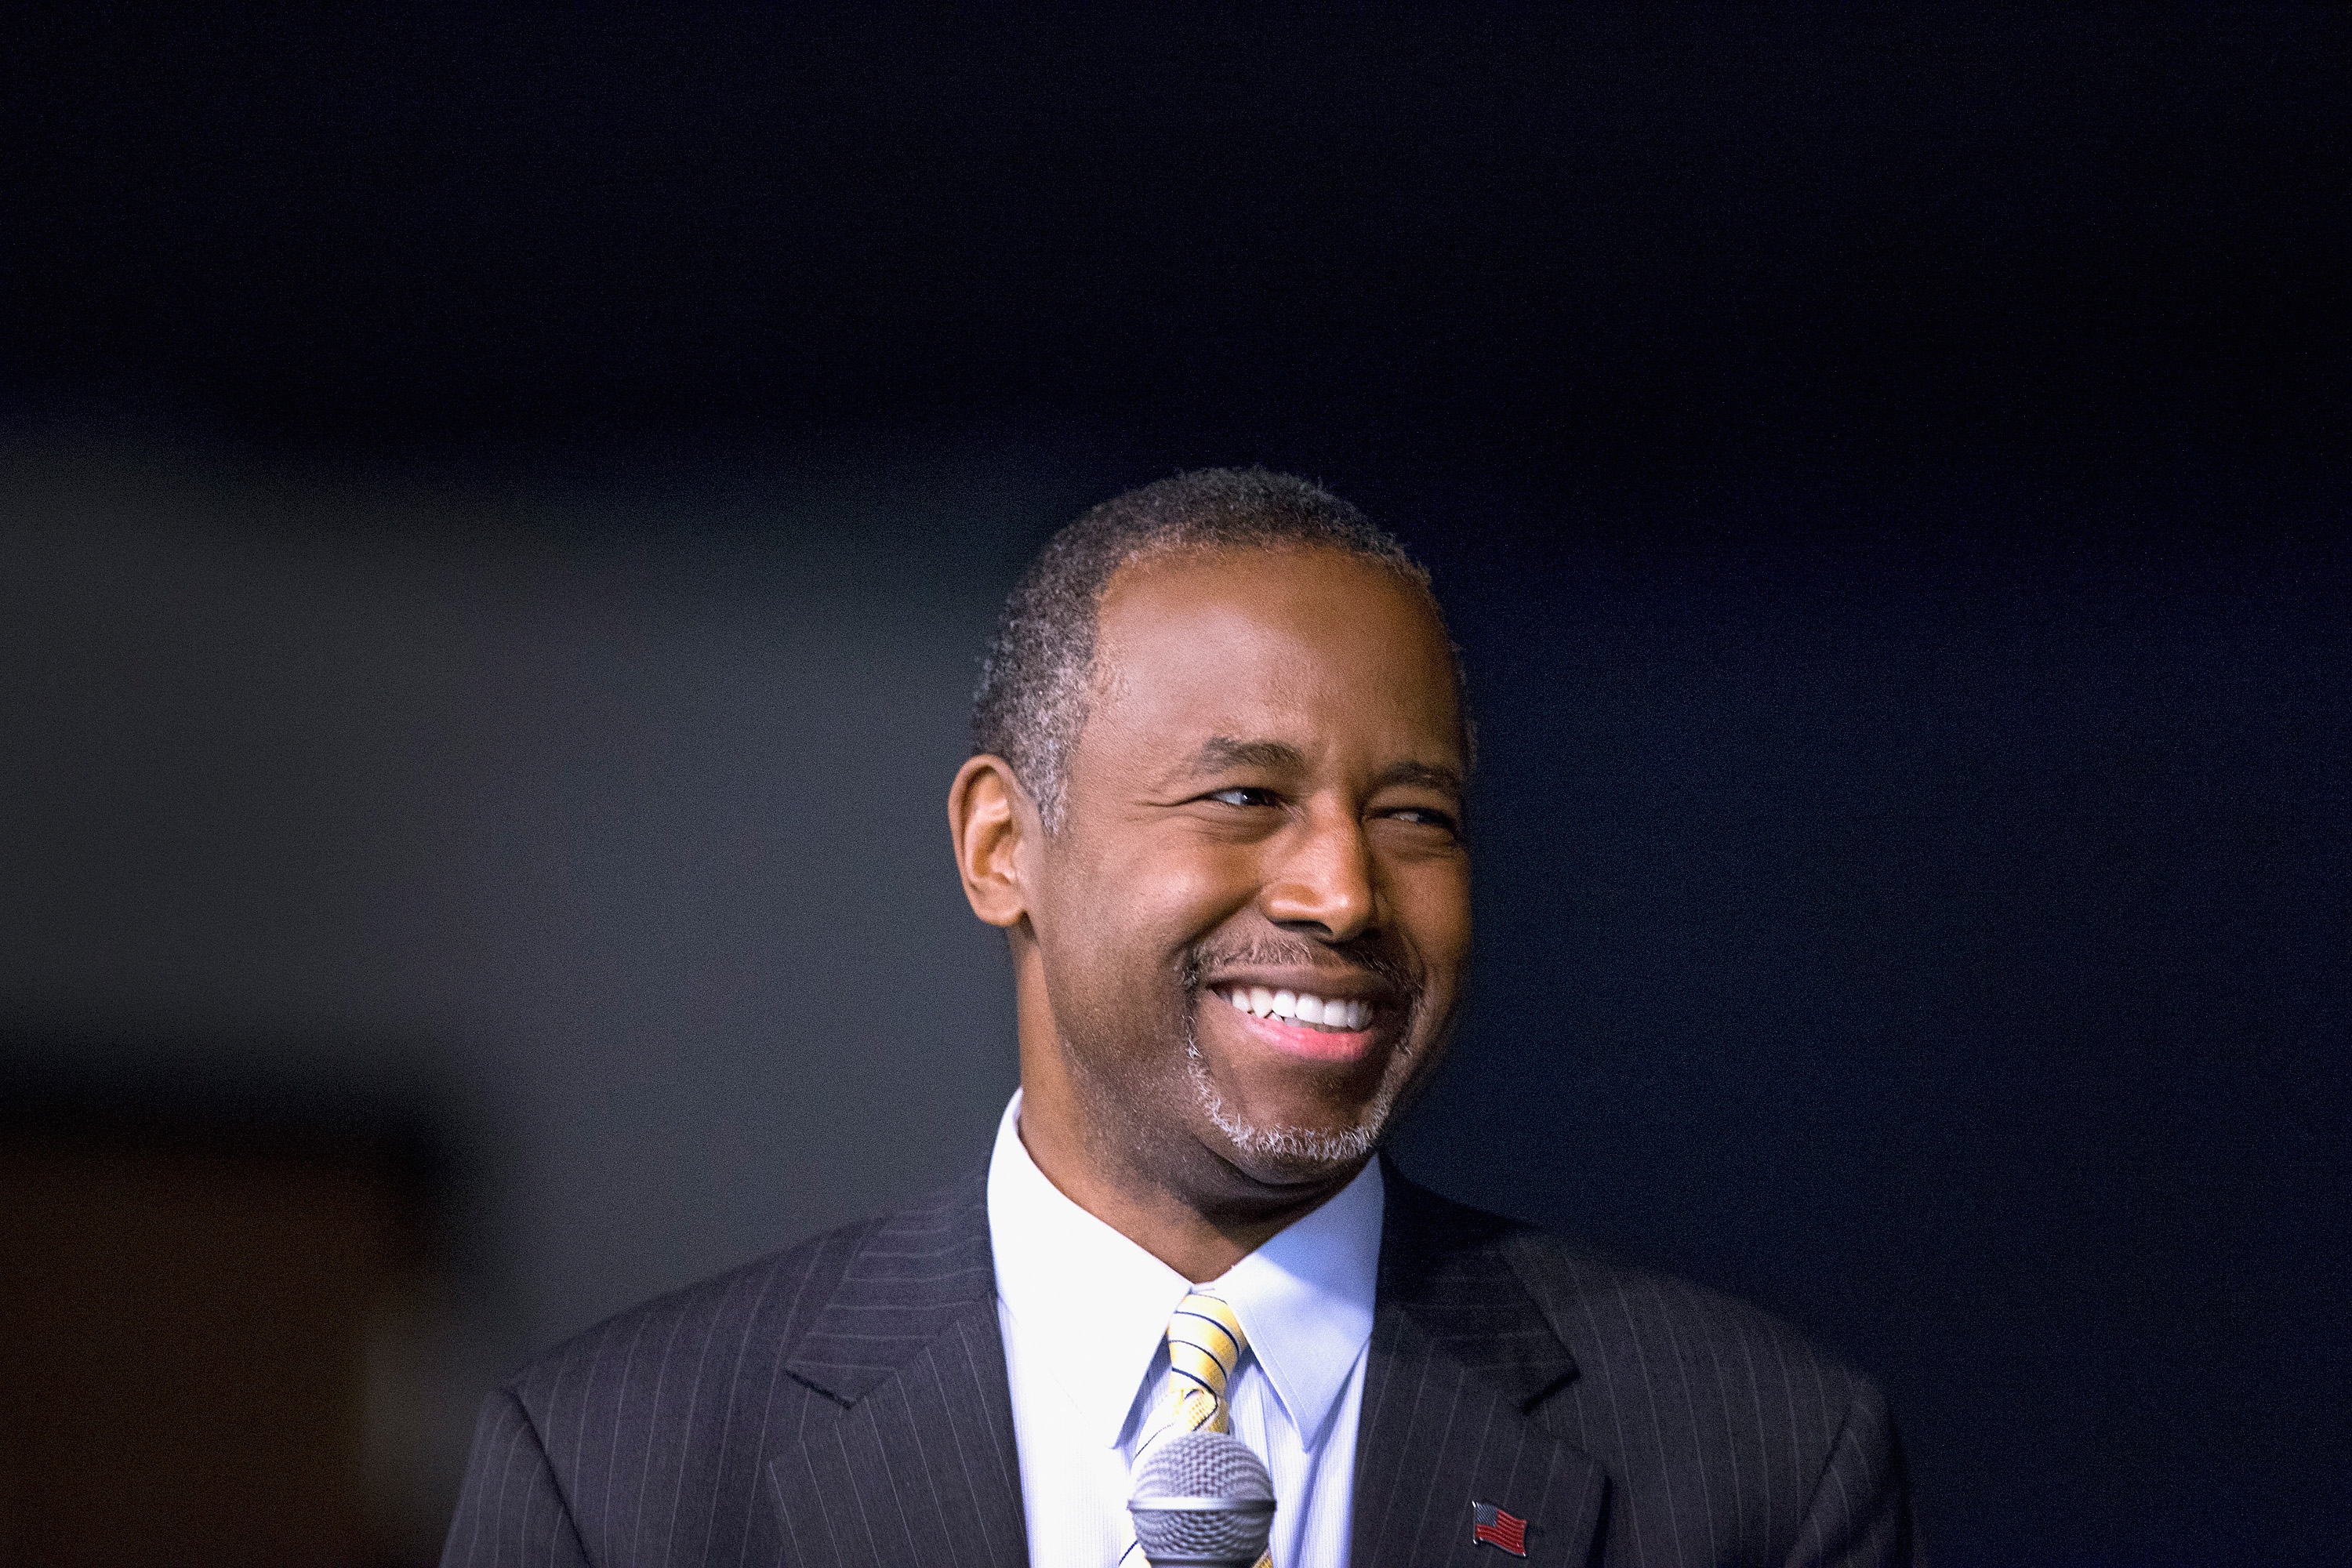 GOP Presidential Candidates Ben Carson And Carly Fiorina Attend BBQ In Iowa